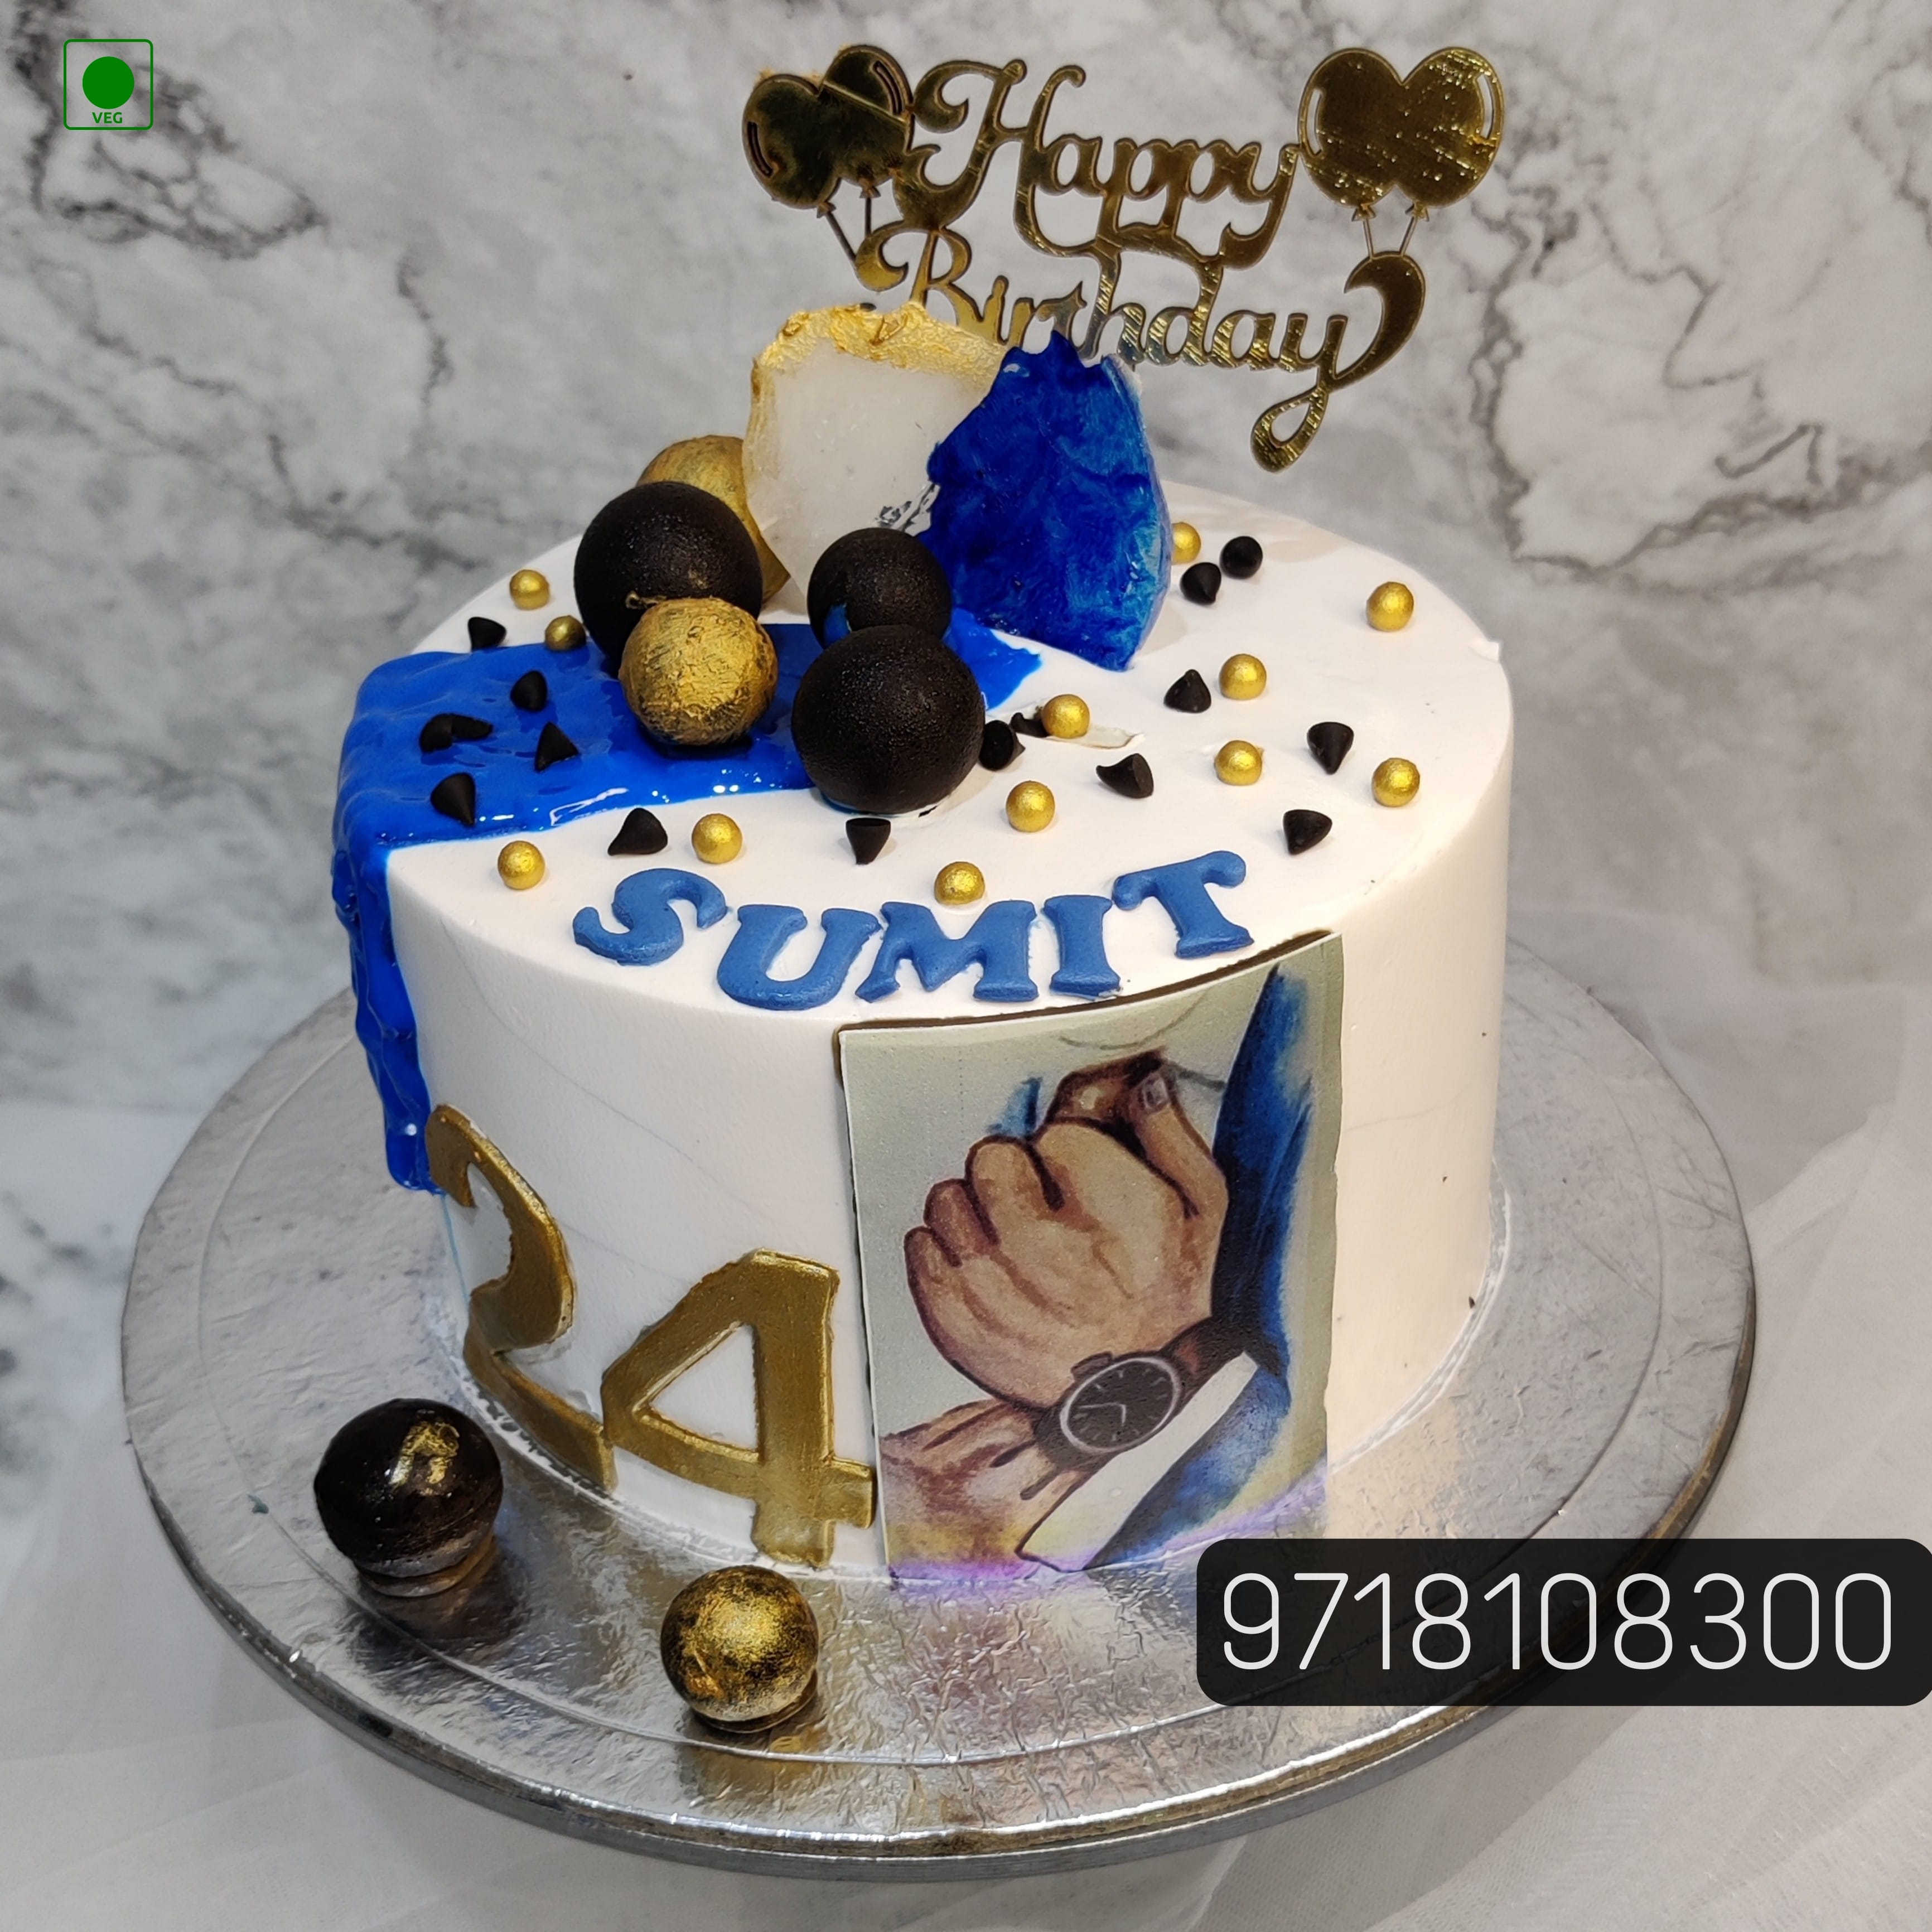 Details more than 68 25th birthday cake for him best  indaotaonec